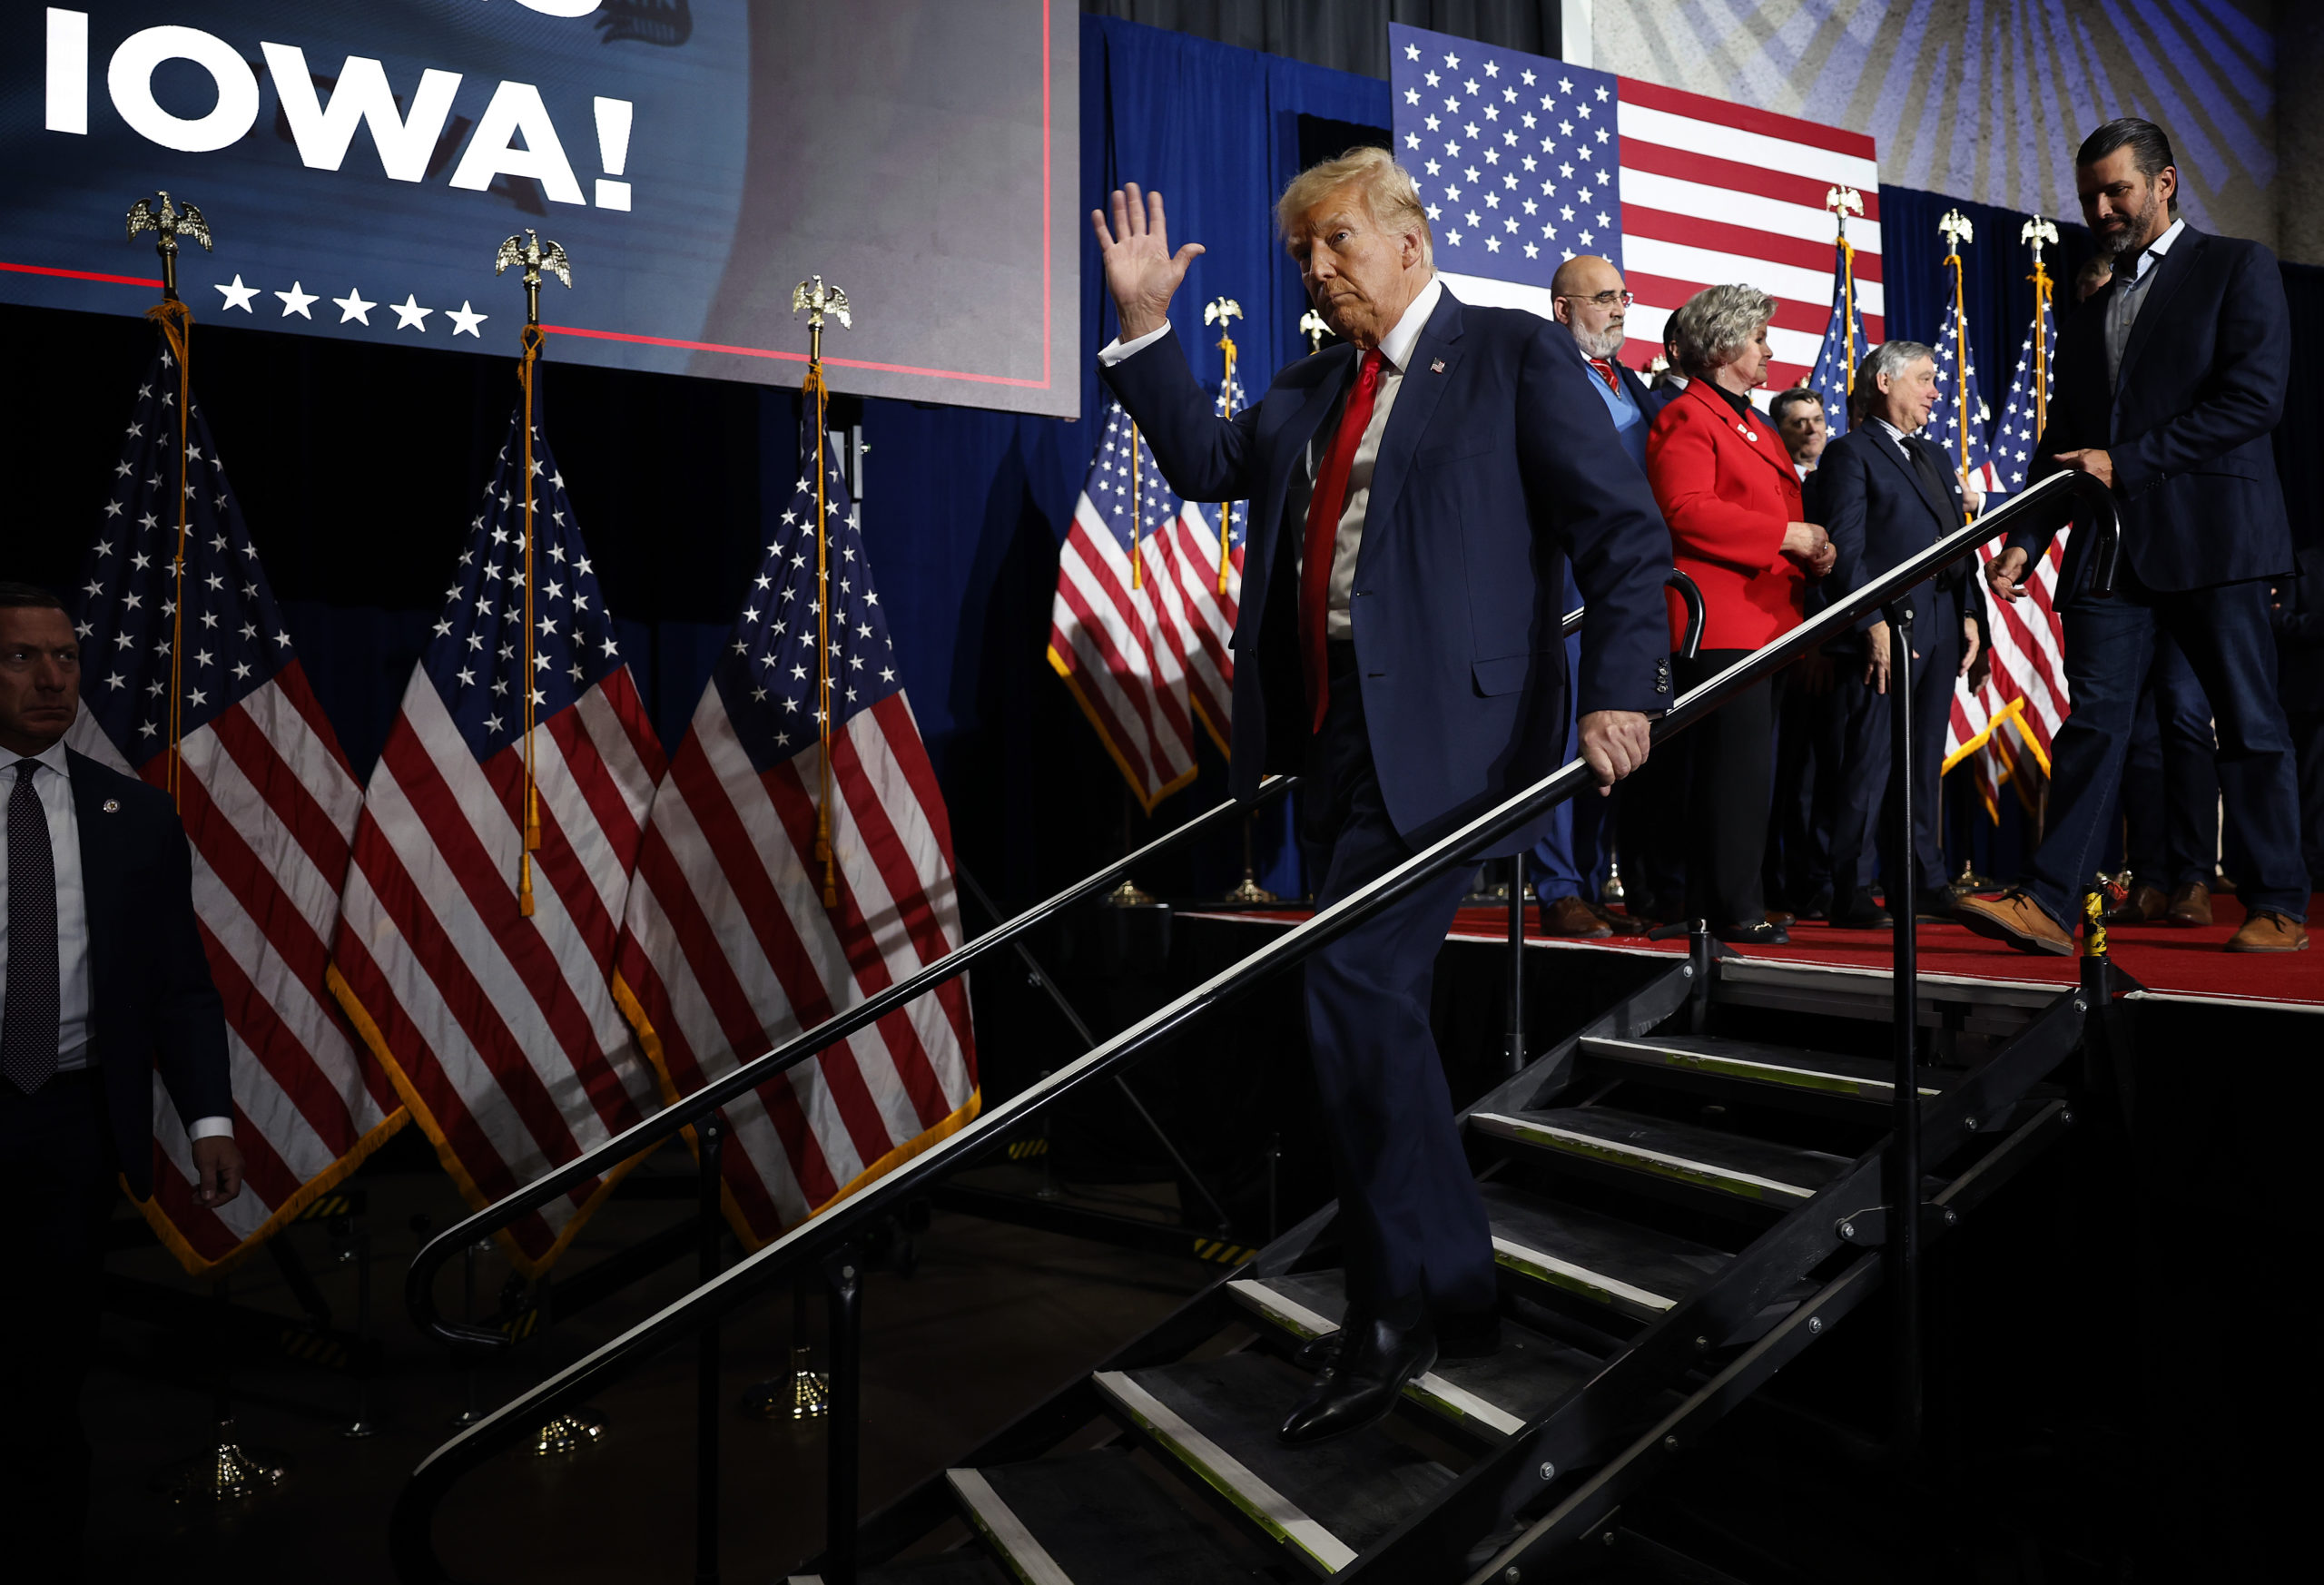 DES MOINES, IOWA - JANUARY 15: Republican presidential candidate, former U.S. President Donald Trump acknowledges supporters during his caucus night event at the Iowa Events Center on January 15, 2024 in Des Moines, Iowa. Iowans voted today in the state’s caucuses for the first contest in the 2024 Republican presidential nominating process. Trump has been projected winner of the Iowa caucus. (Photo by Chip Somodevilla/Getty Images)